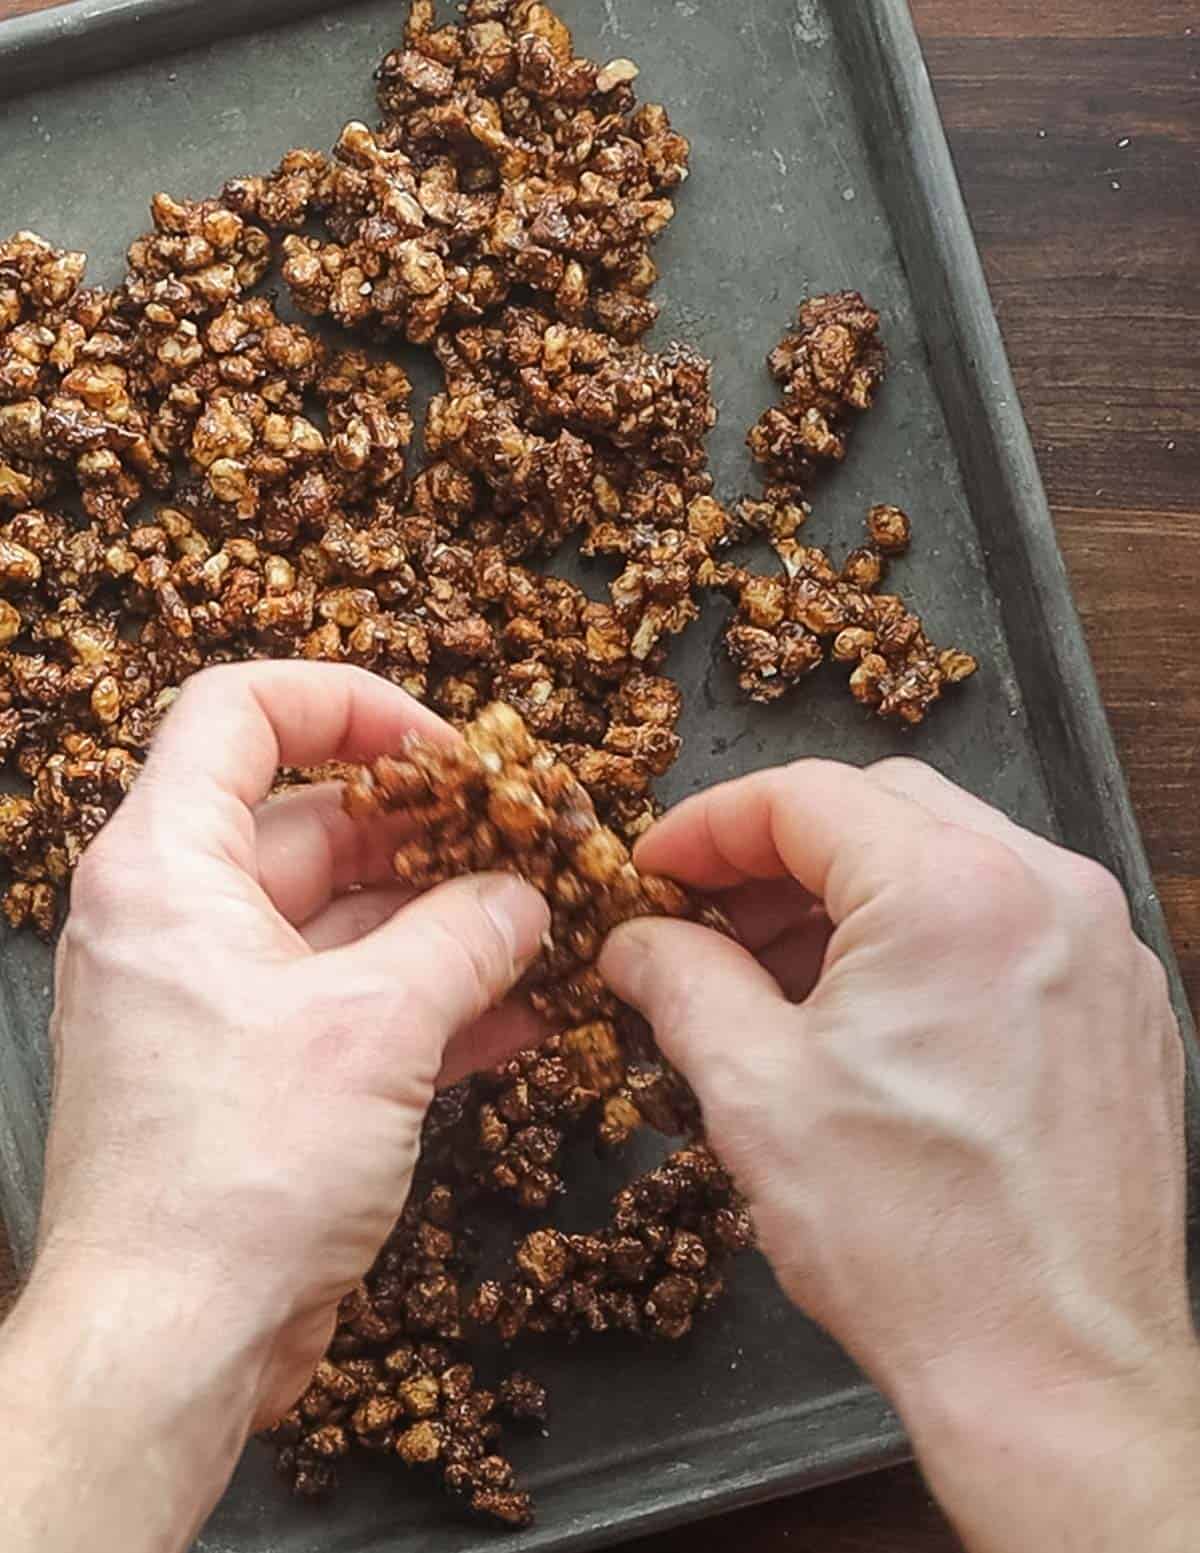 Breaking apart candied walnuts by hand after cooling. 